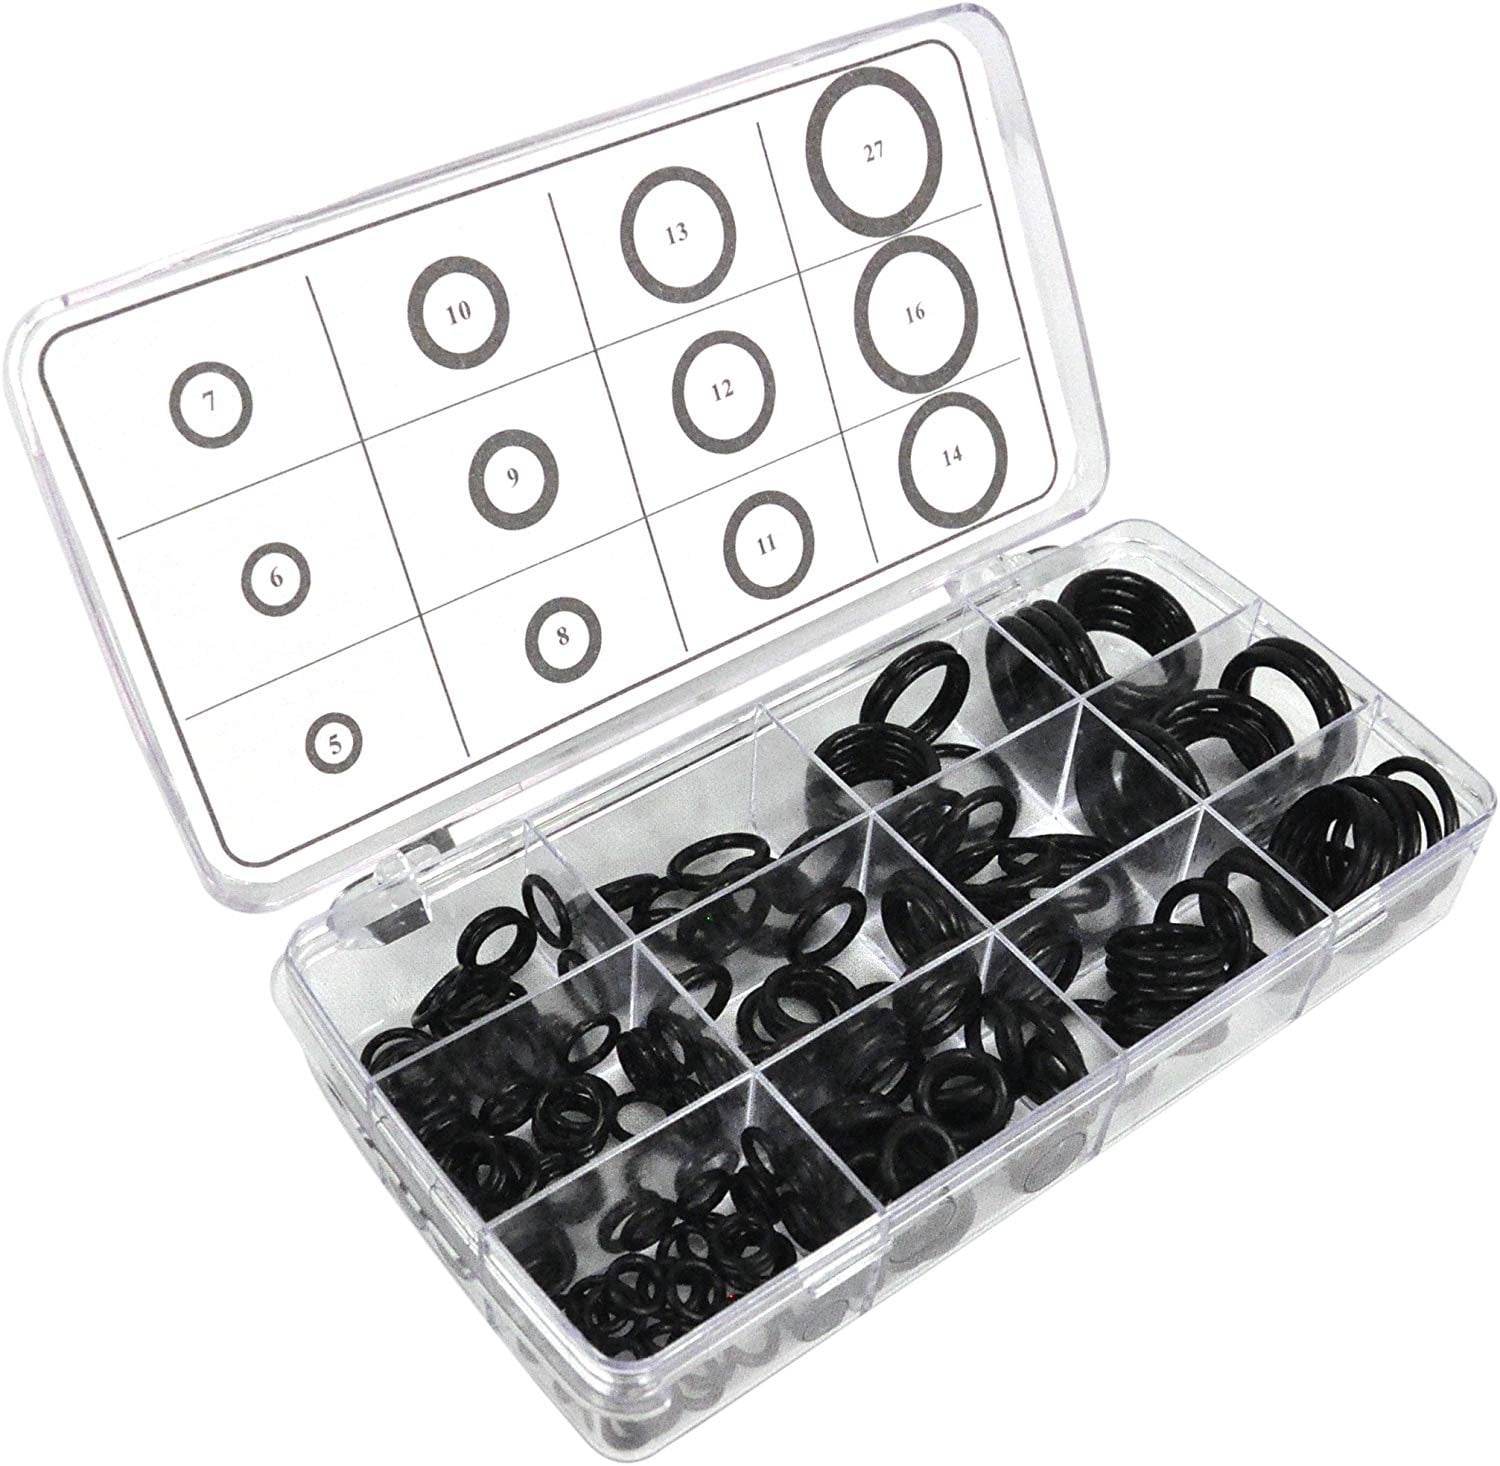 for Car Plumbing,Automotive,General Repair,Air or Gas Connections 225Pcs Assorted Rubber Gasket Tosuny O Ring Set Gasket Washer Seal Assortment Set